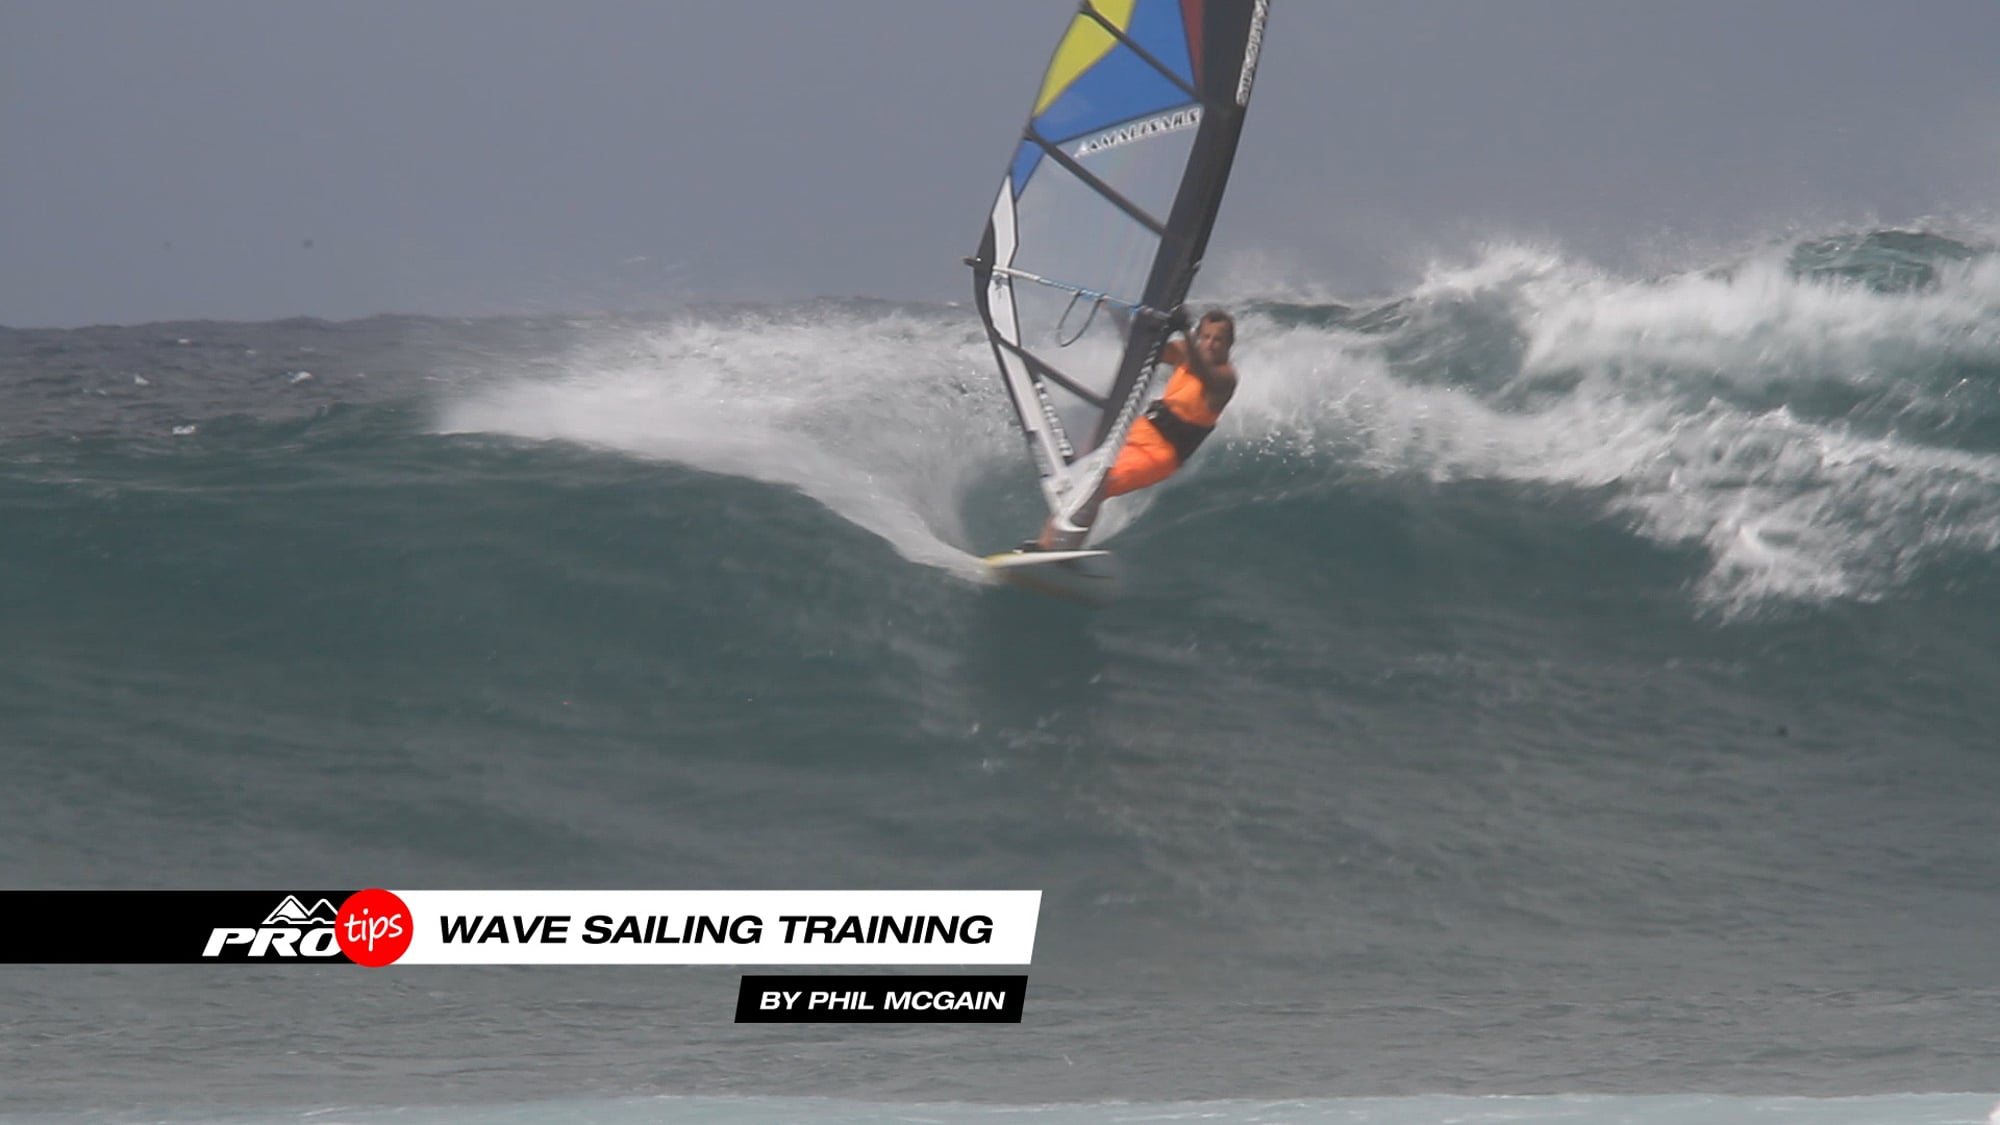 Pro Tips Windsurfing Wave Training How to prepare for a wave contest Windsurfing Videos MauiSails Hawaii